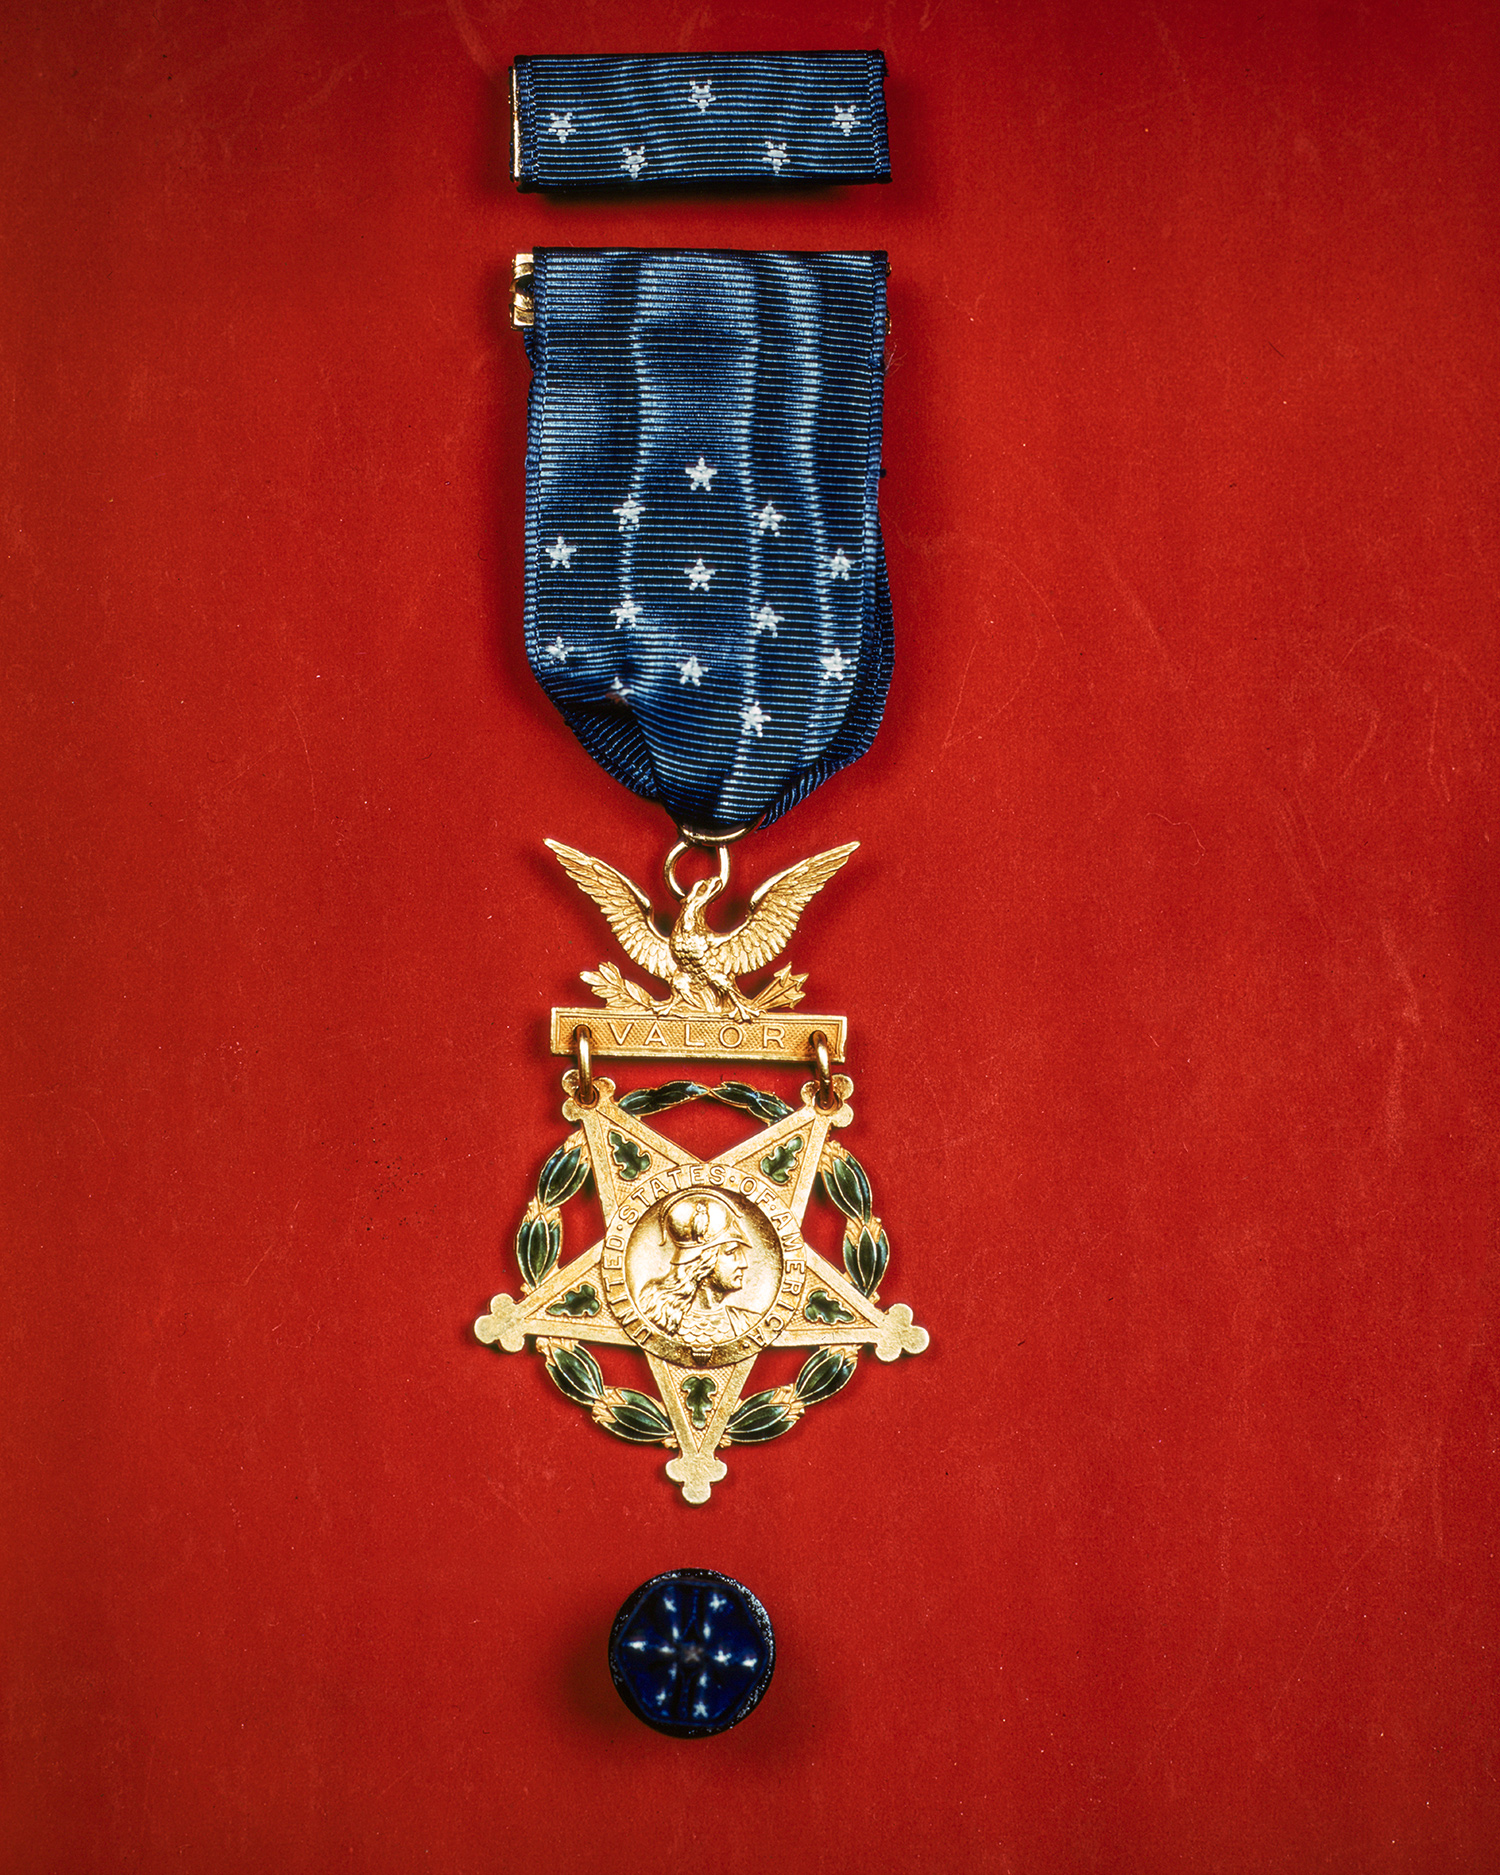 The Medal of Honor, which consists of a five-pointed star with the helmeted goddess Minerva in the center, encircled by a wreath, suspended from a blue ribbon with a gold bar reading “Valor.” 